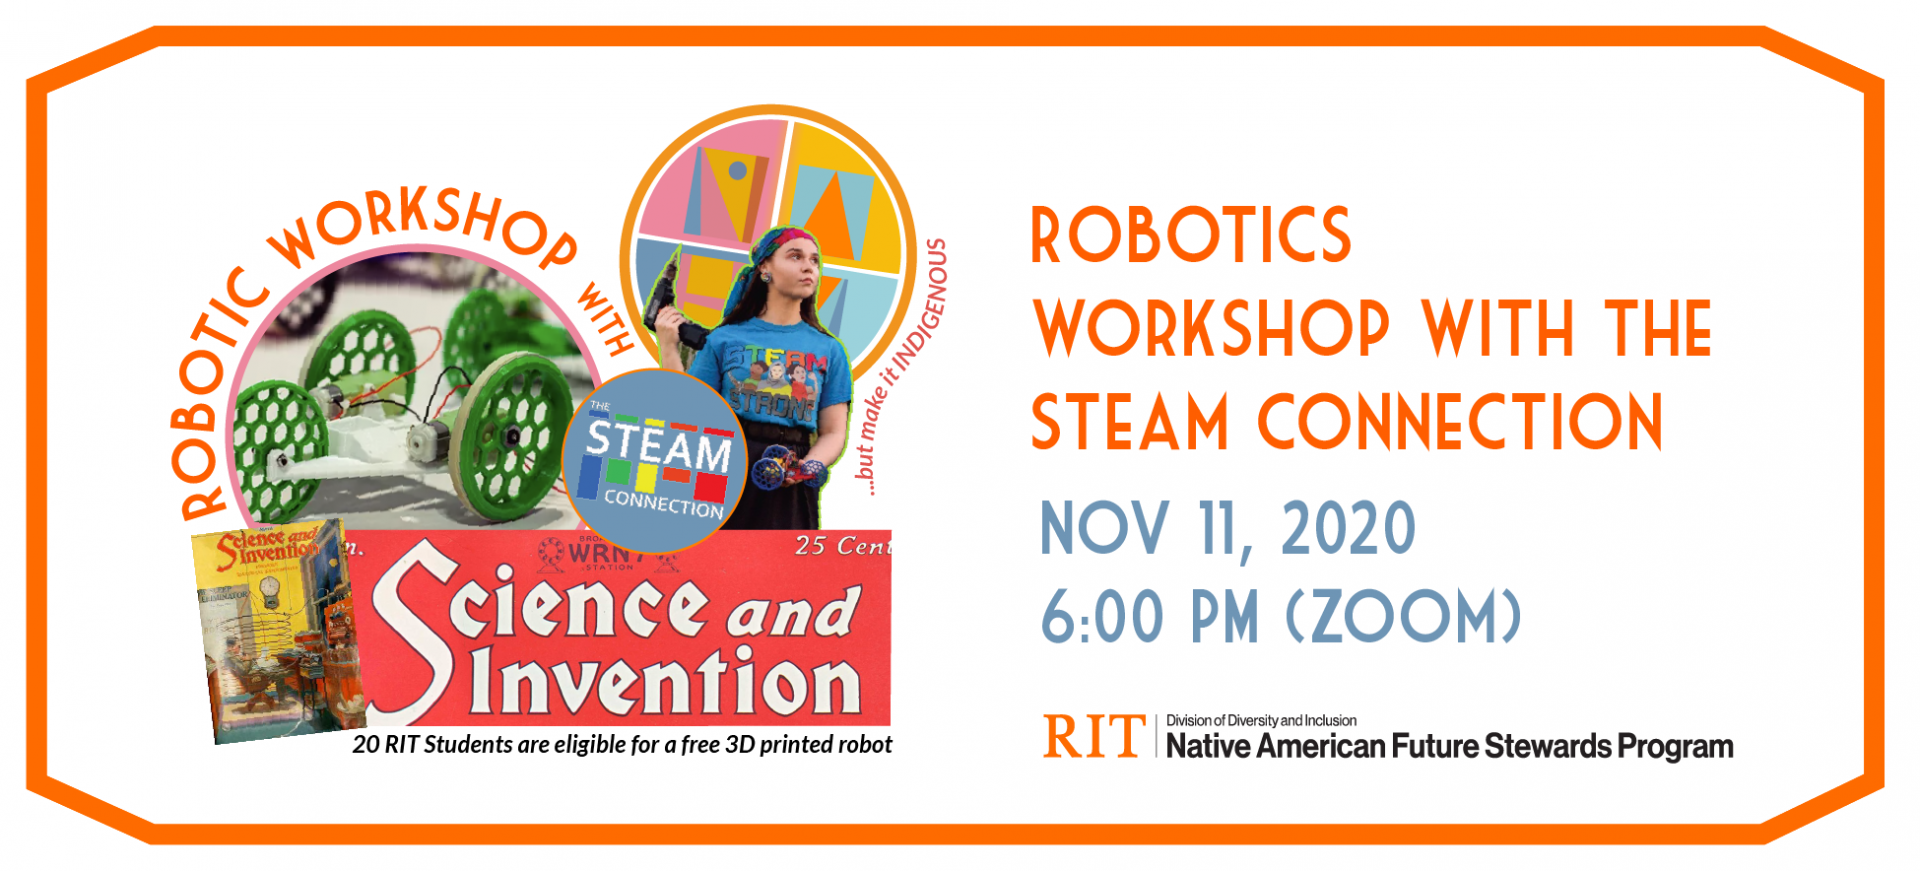 A collage of images including Danielle Boyer, Science & invention magazine logo, and three circles filled with images of a 3D printed, N A H M letters, the Steam connection logo. Words Robotics Workshop with the STEAM Connection. Details of event on the right side of the image. In fine print under collage, it says, "20 RIT students are eligible for a free 3D printed robot